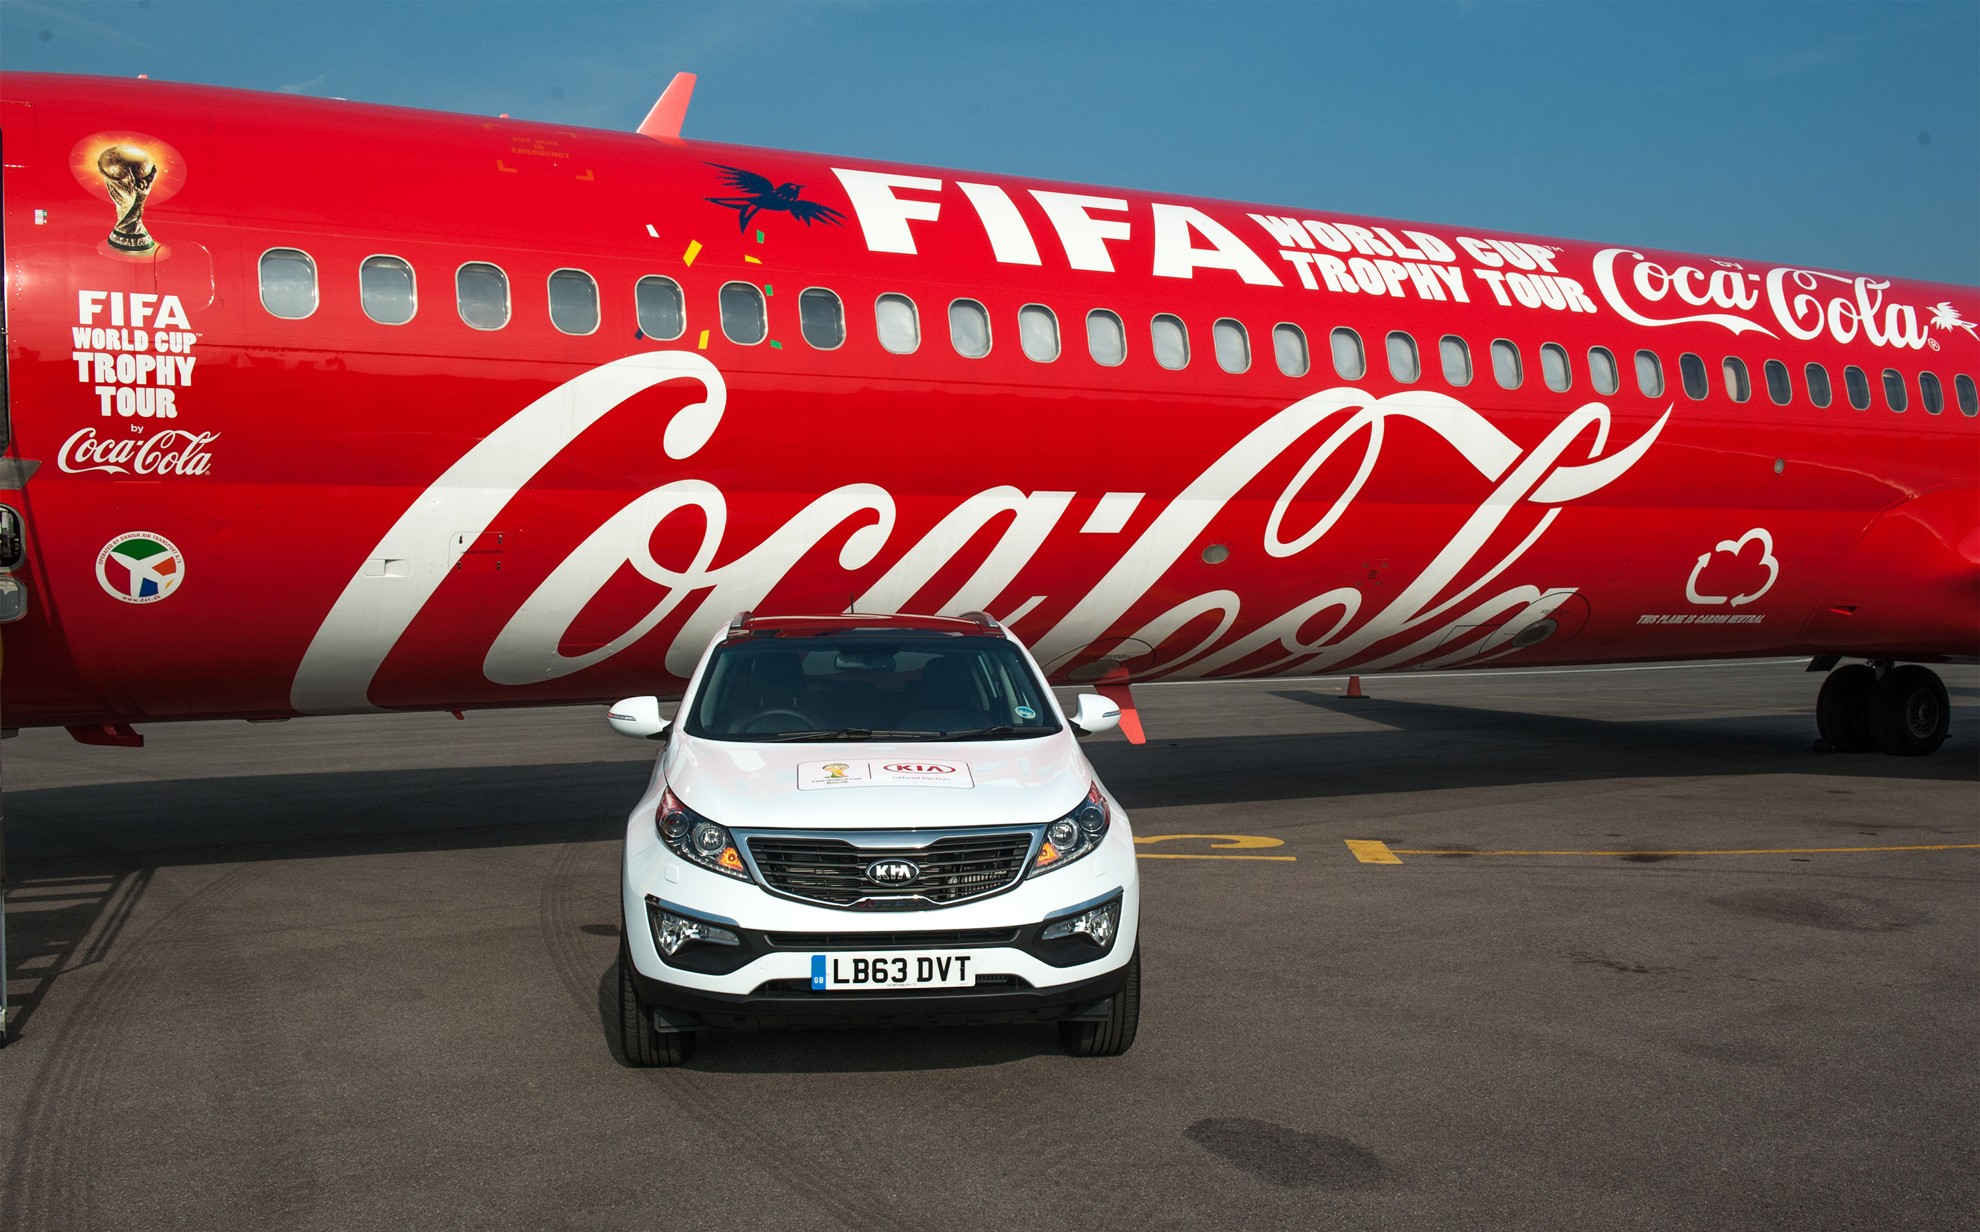 FIFA World Cup Trophy Tour by Coca-Cola